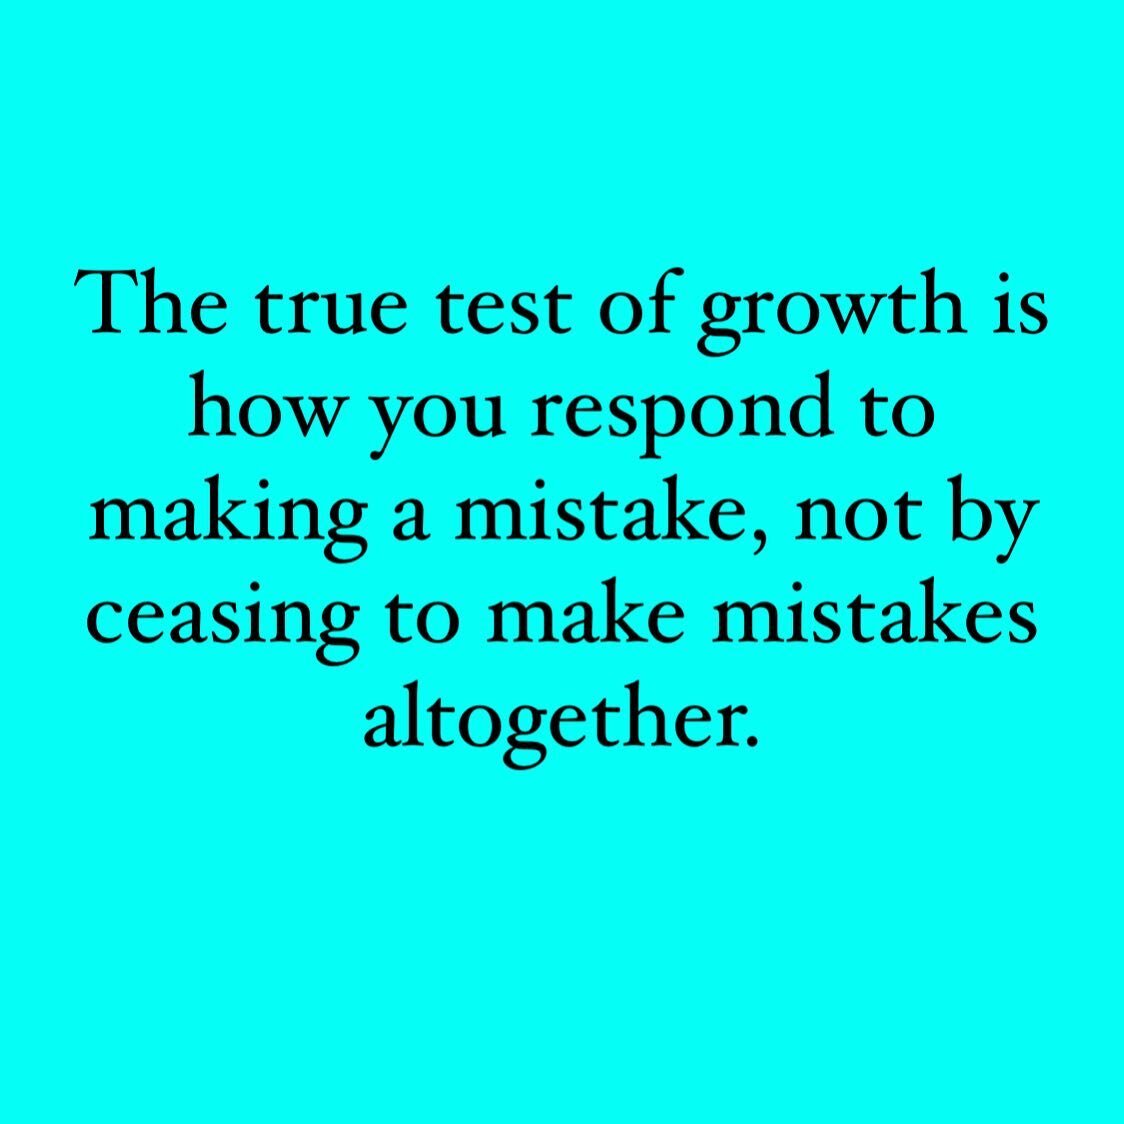 If you respond to your mistakes with hogwash notions like &ldquo;I&rsquo;m such a failure&rdquo; or &ldquo;everything I do is wrong,&rdquo; you will get stuck in quicksand and probably take others down with you. Own your mistake while also making sta